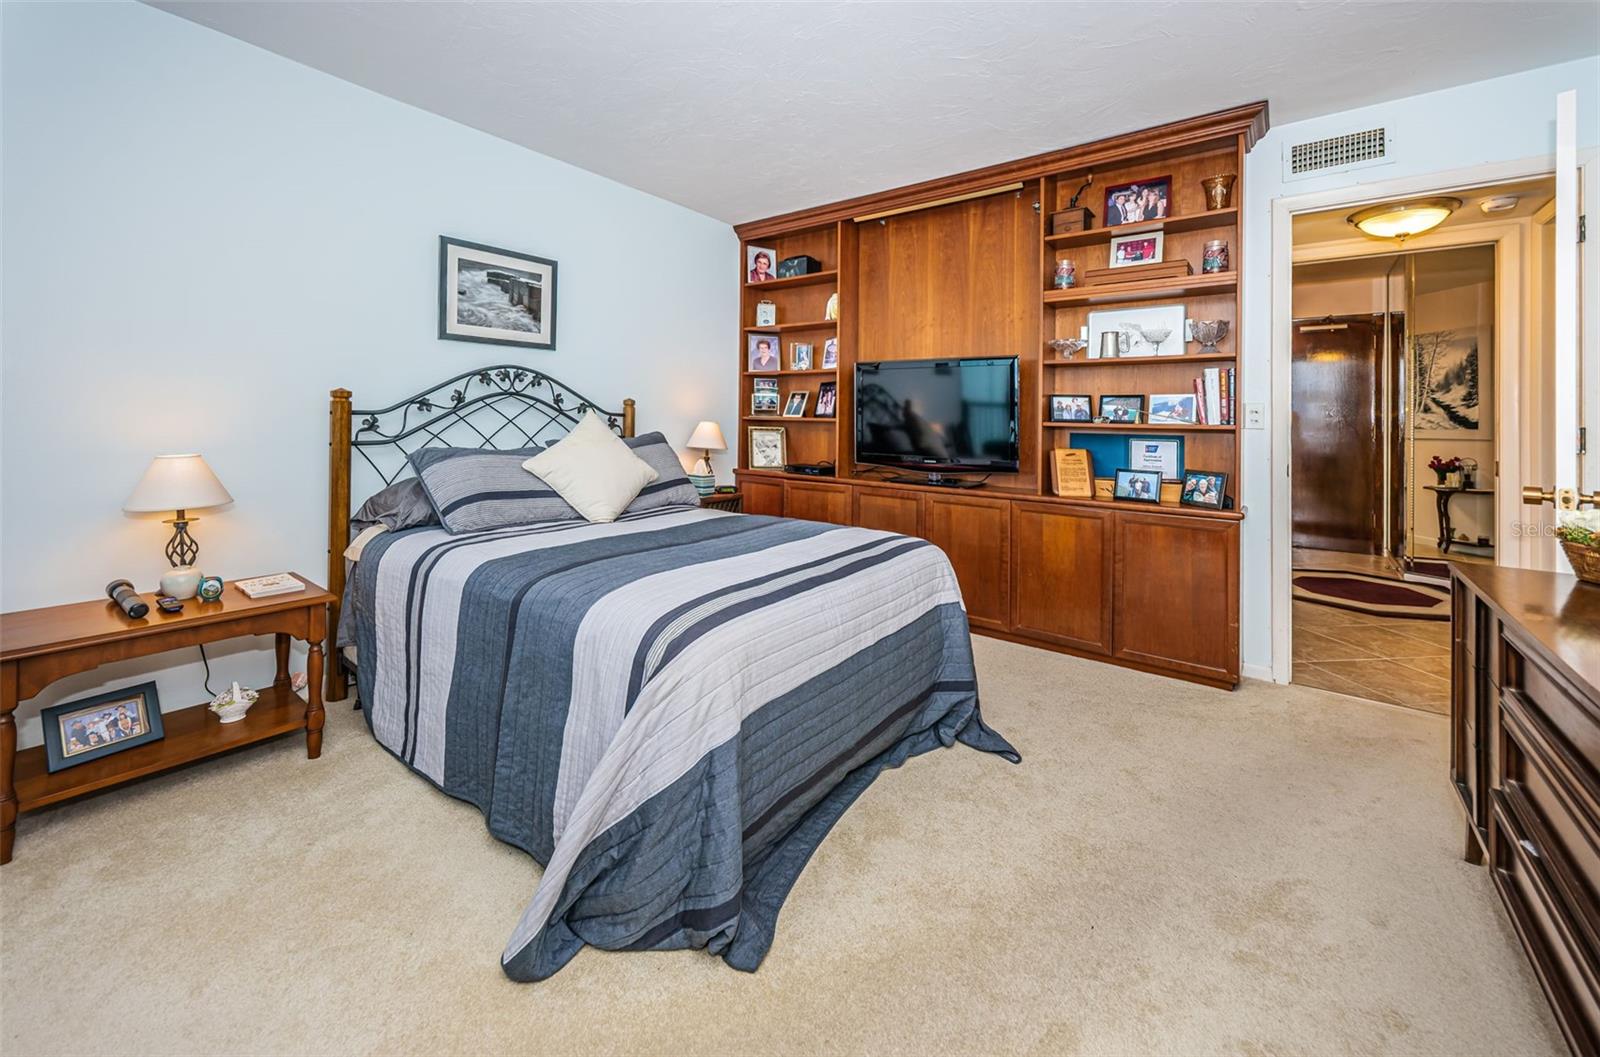 Second bedroom with built-in entertainment center